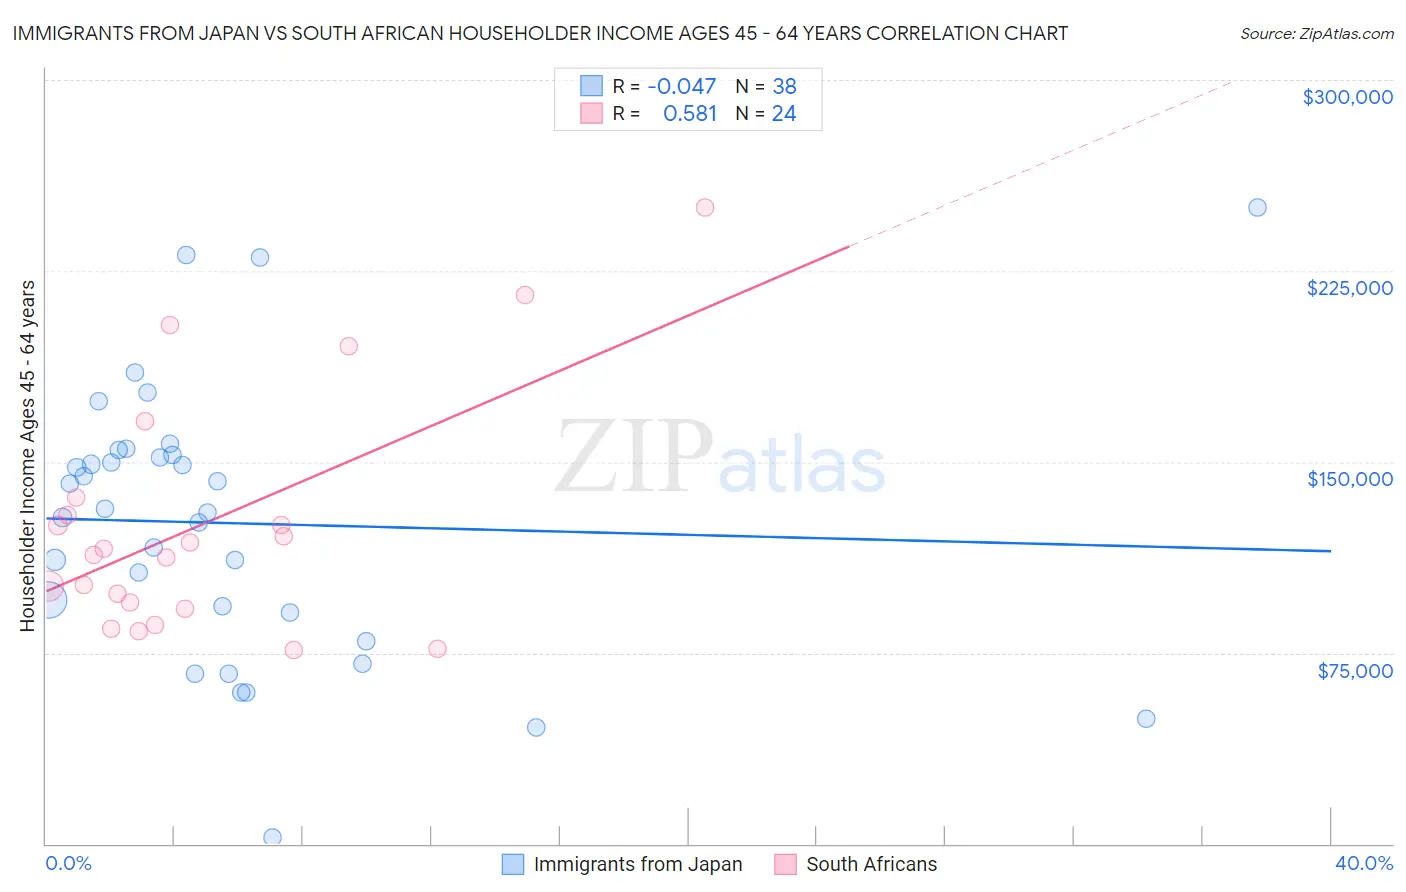 Immigrants from Japan vs South African Householder Income Ages 45 - 64 years